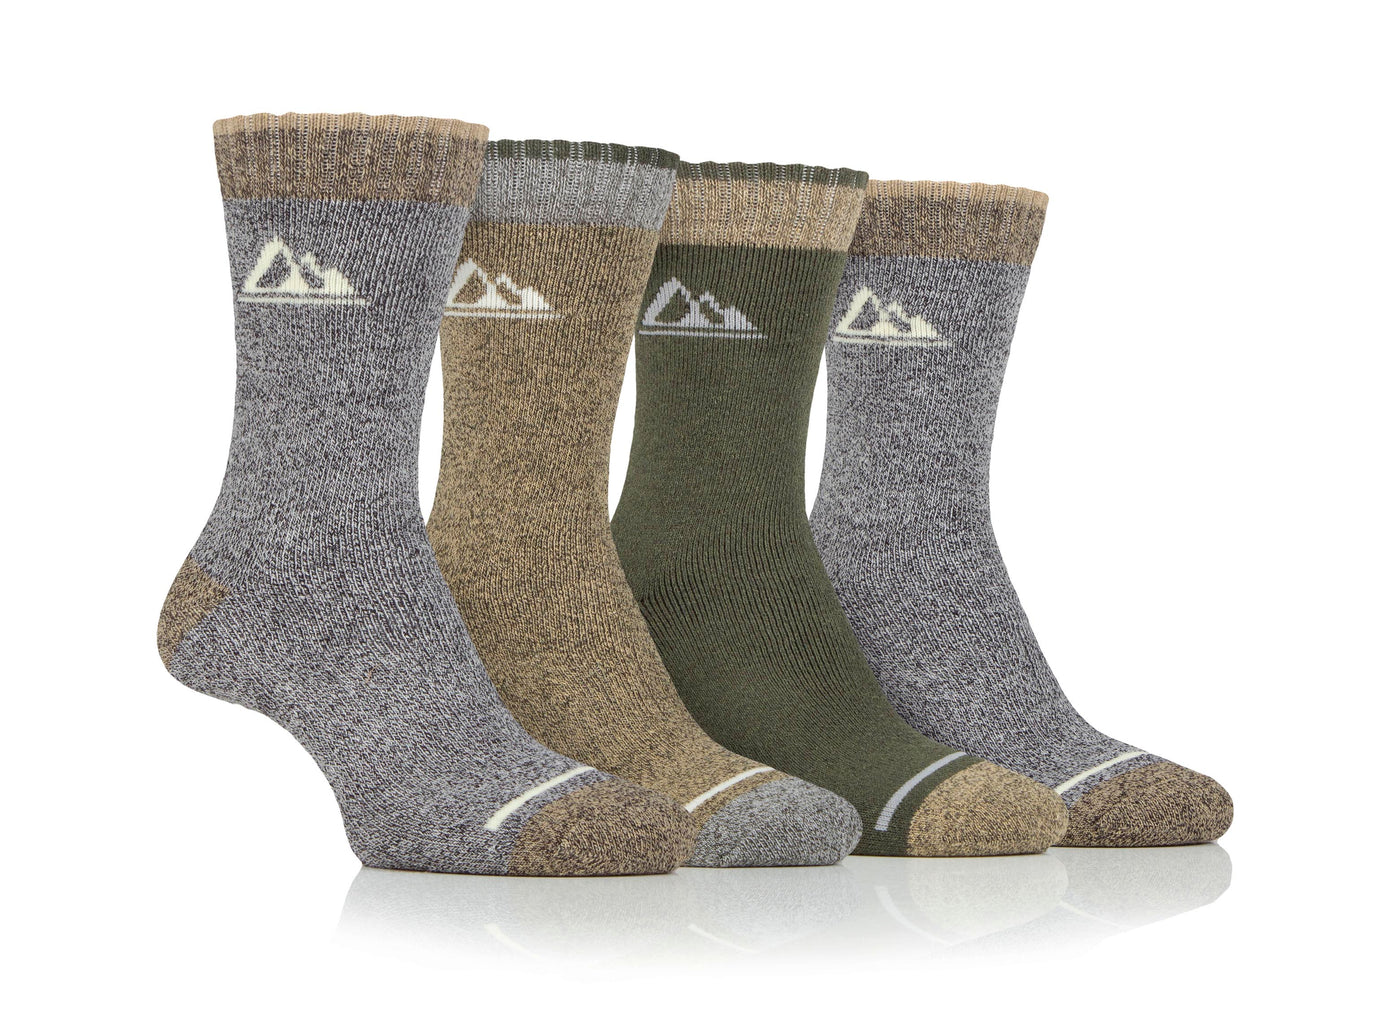 Men's "Performance" socks from Storm Valley - pack of 4 pairs